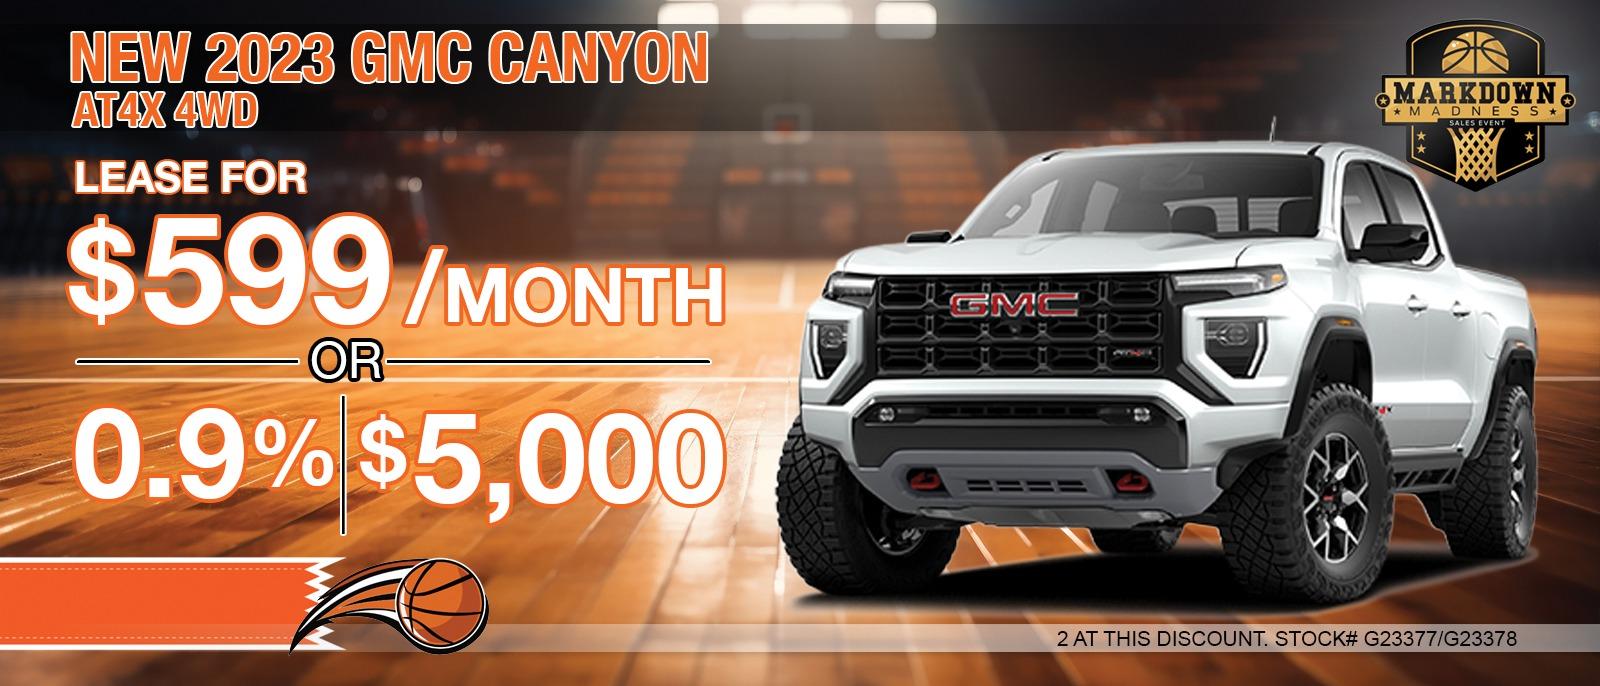 2023 GMC CANYON ATX. Your Net Savings After All Offers $5,000 OFF MSRP.